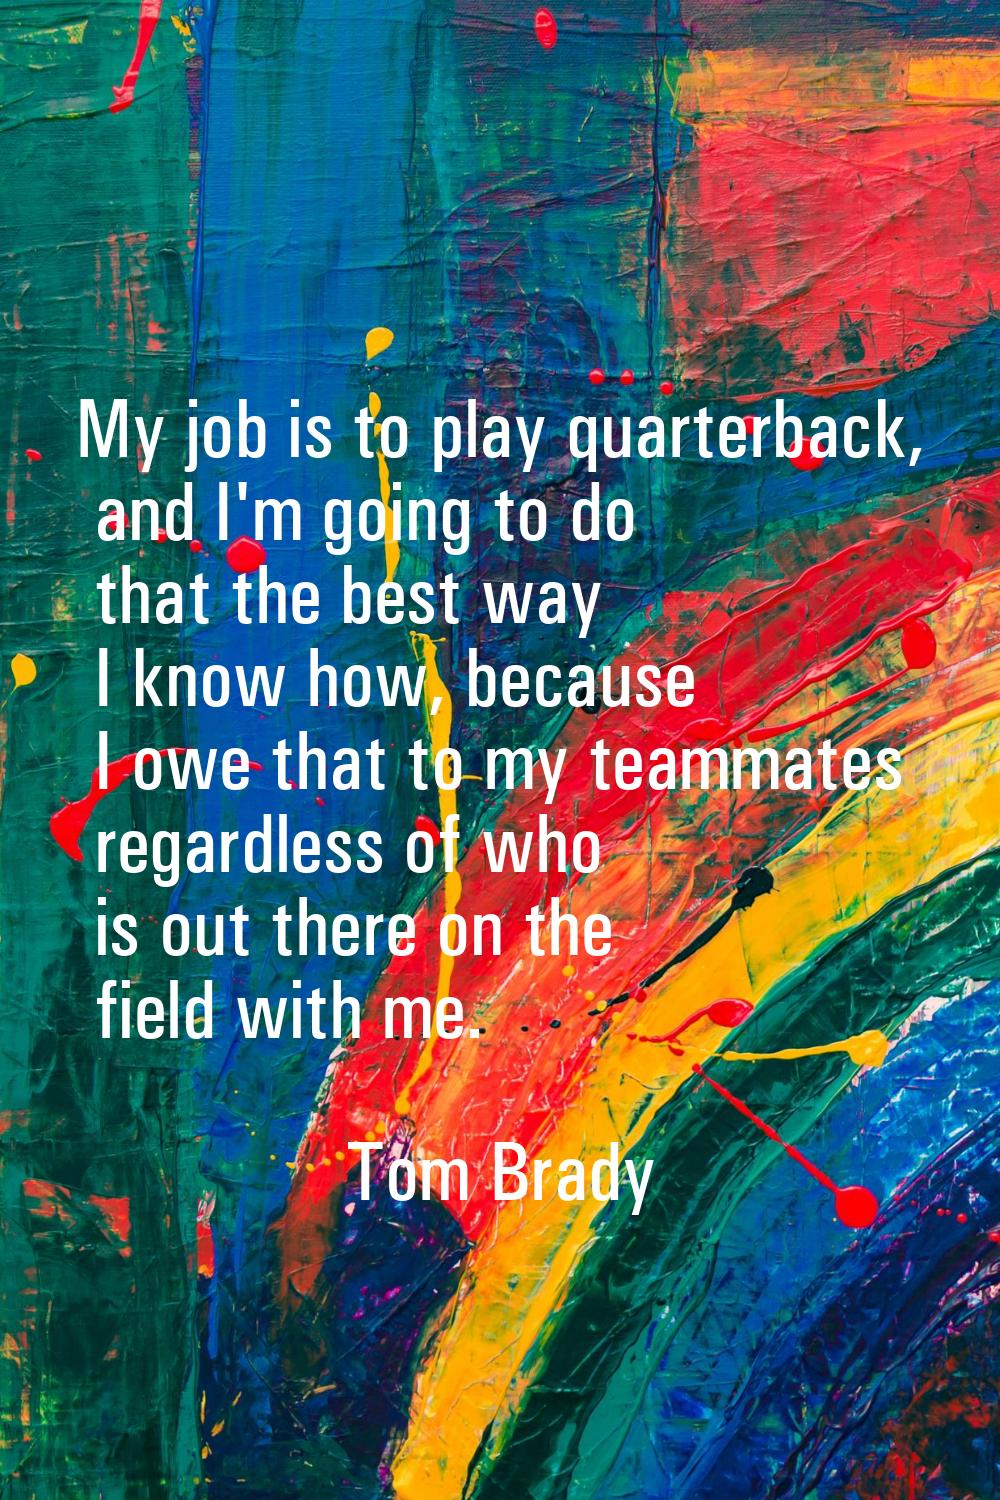 My job is to play quarterback, and I'm going to do that the best way I know how, because I owe that